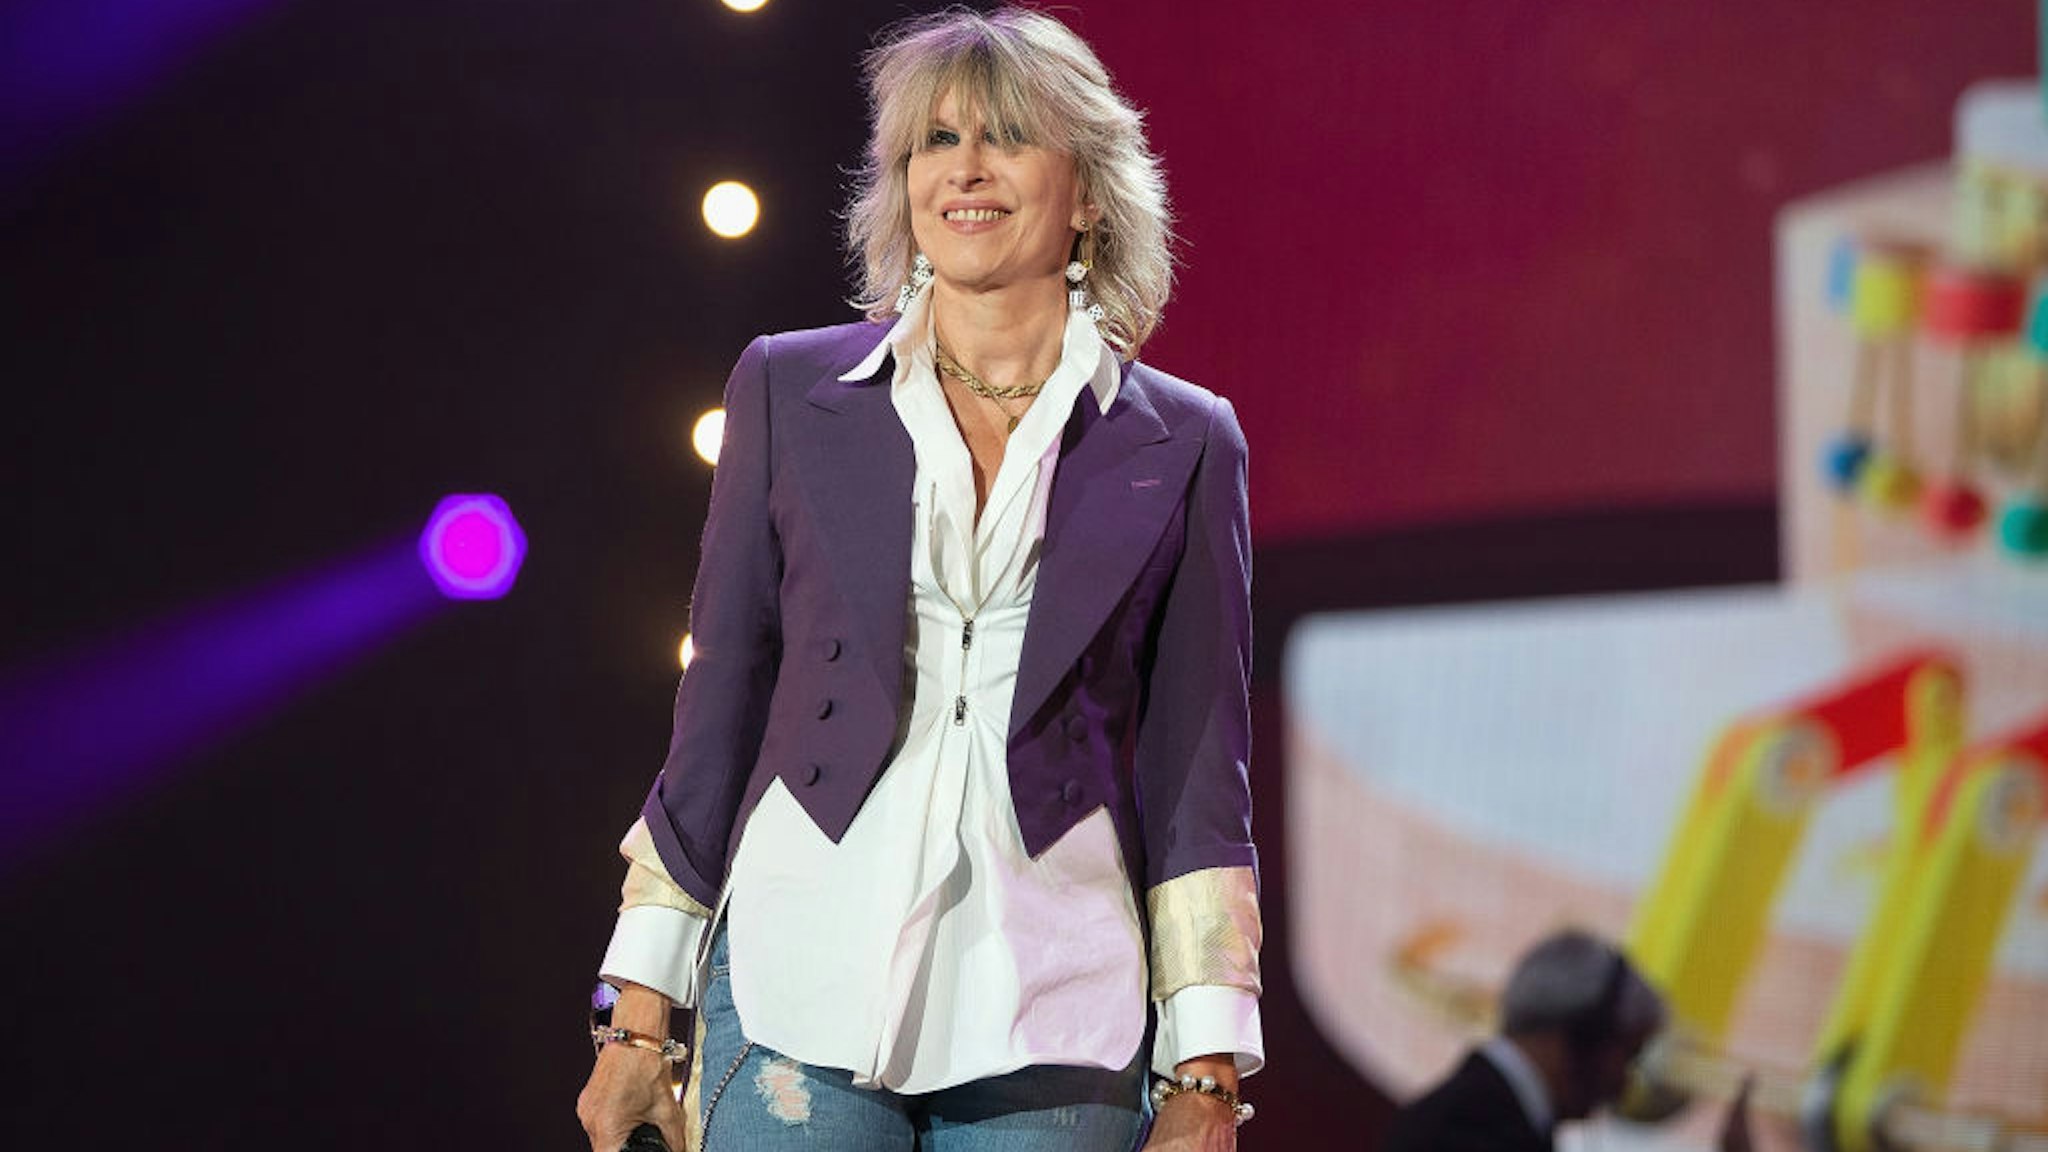 Chrissie Hynde performs on stage during BBC Proms In The Park 2019 at Hyde Park on September 14, 2019